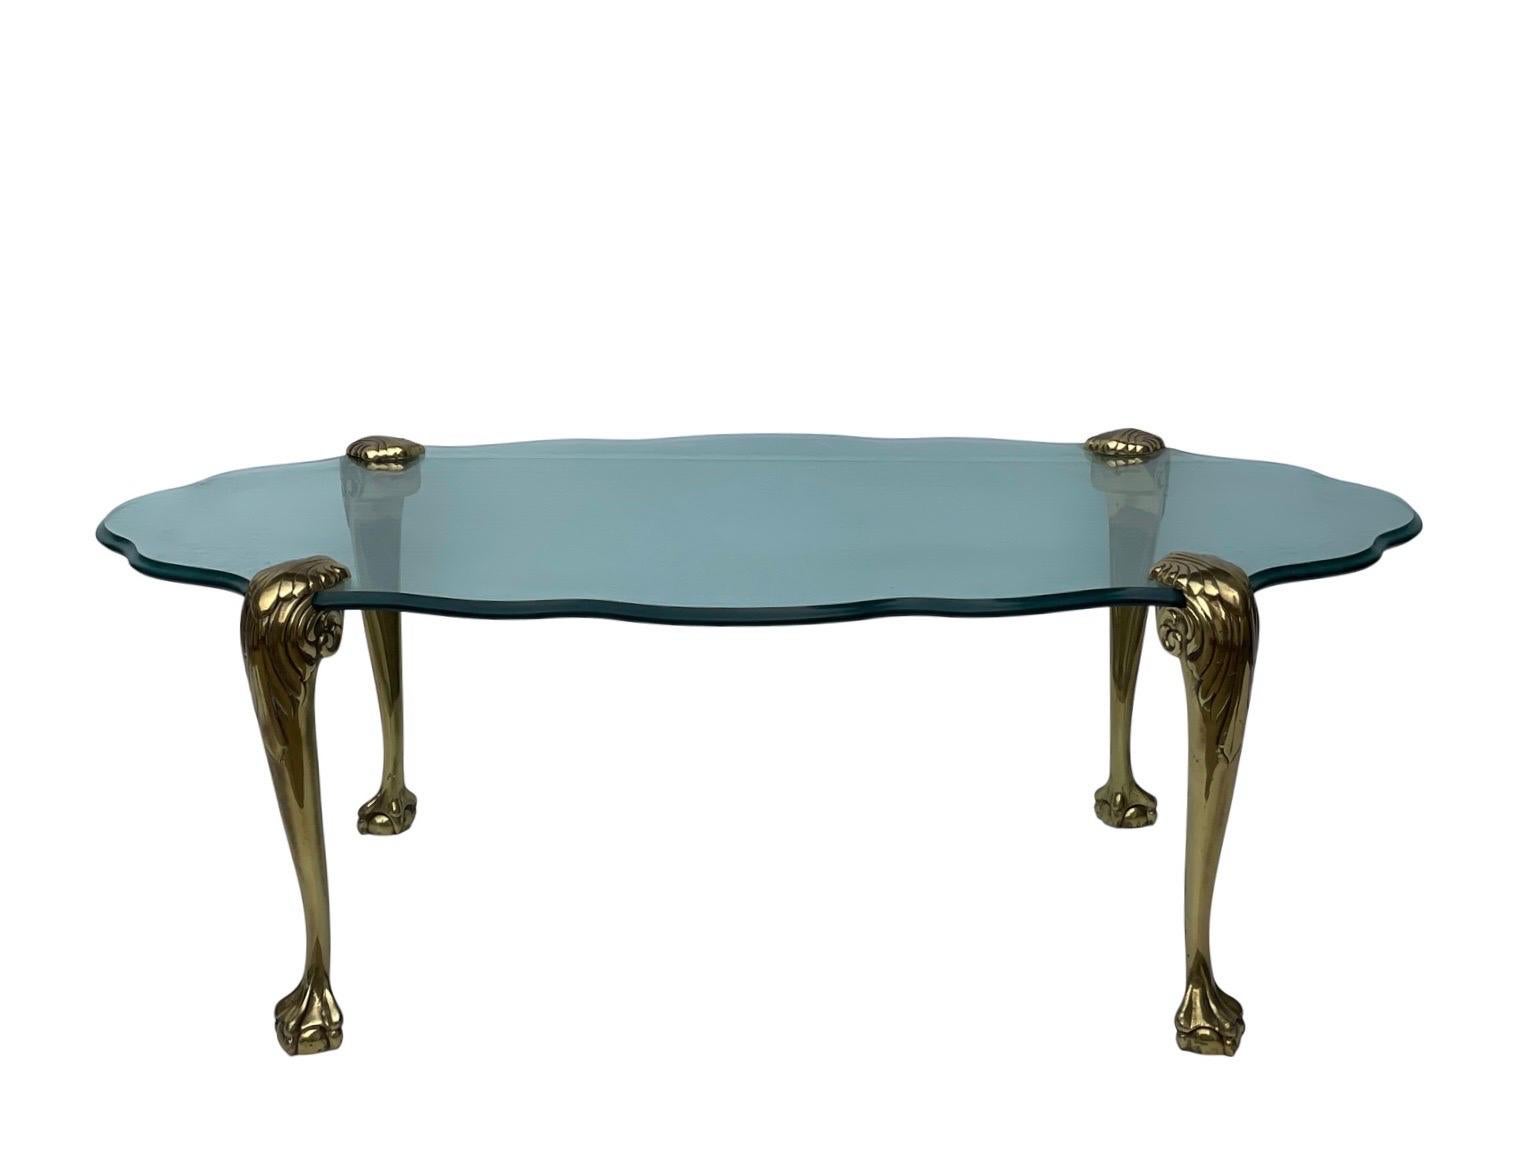 Stunning Italian design beveled glass coffee table with sculpted solid brass claw feet legs.